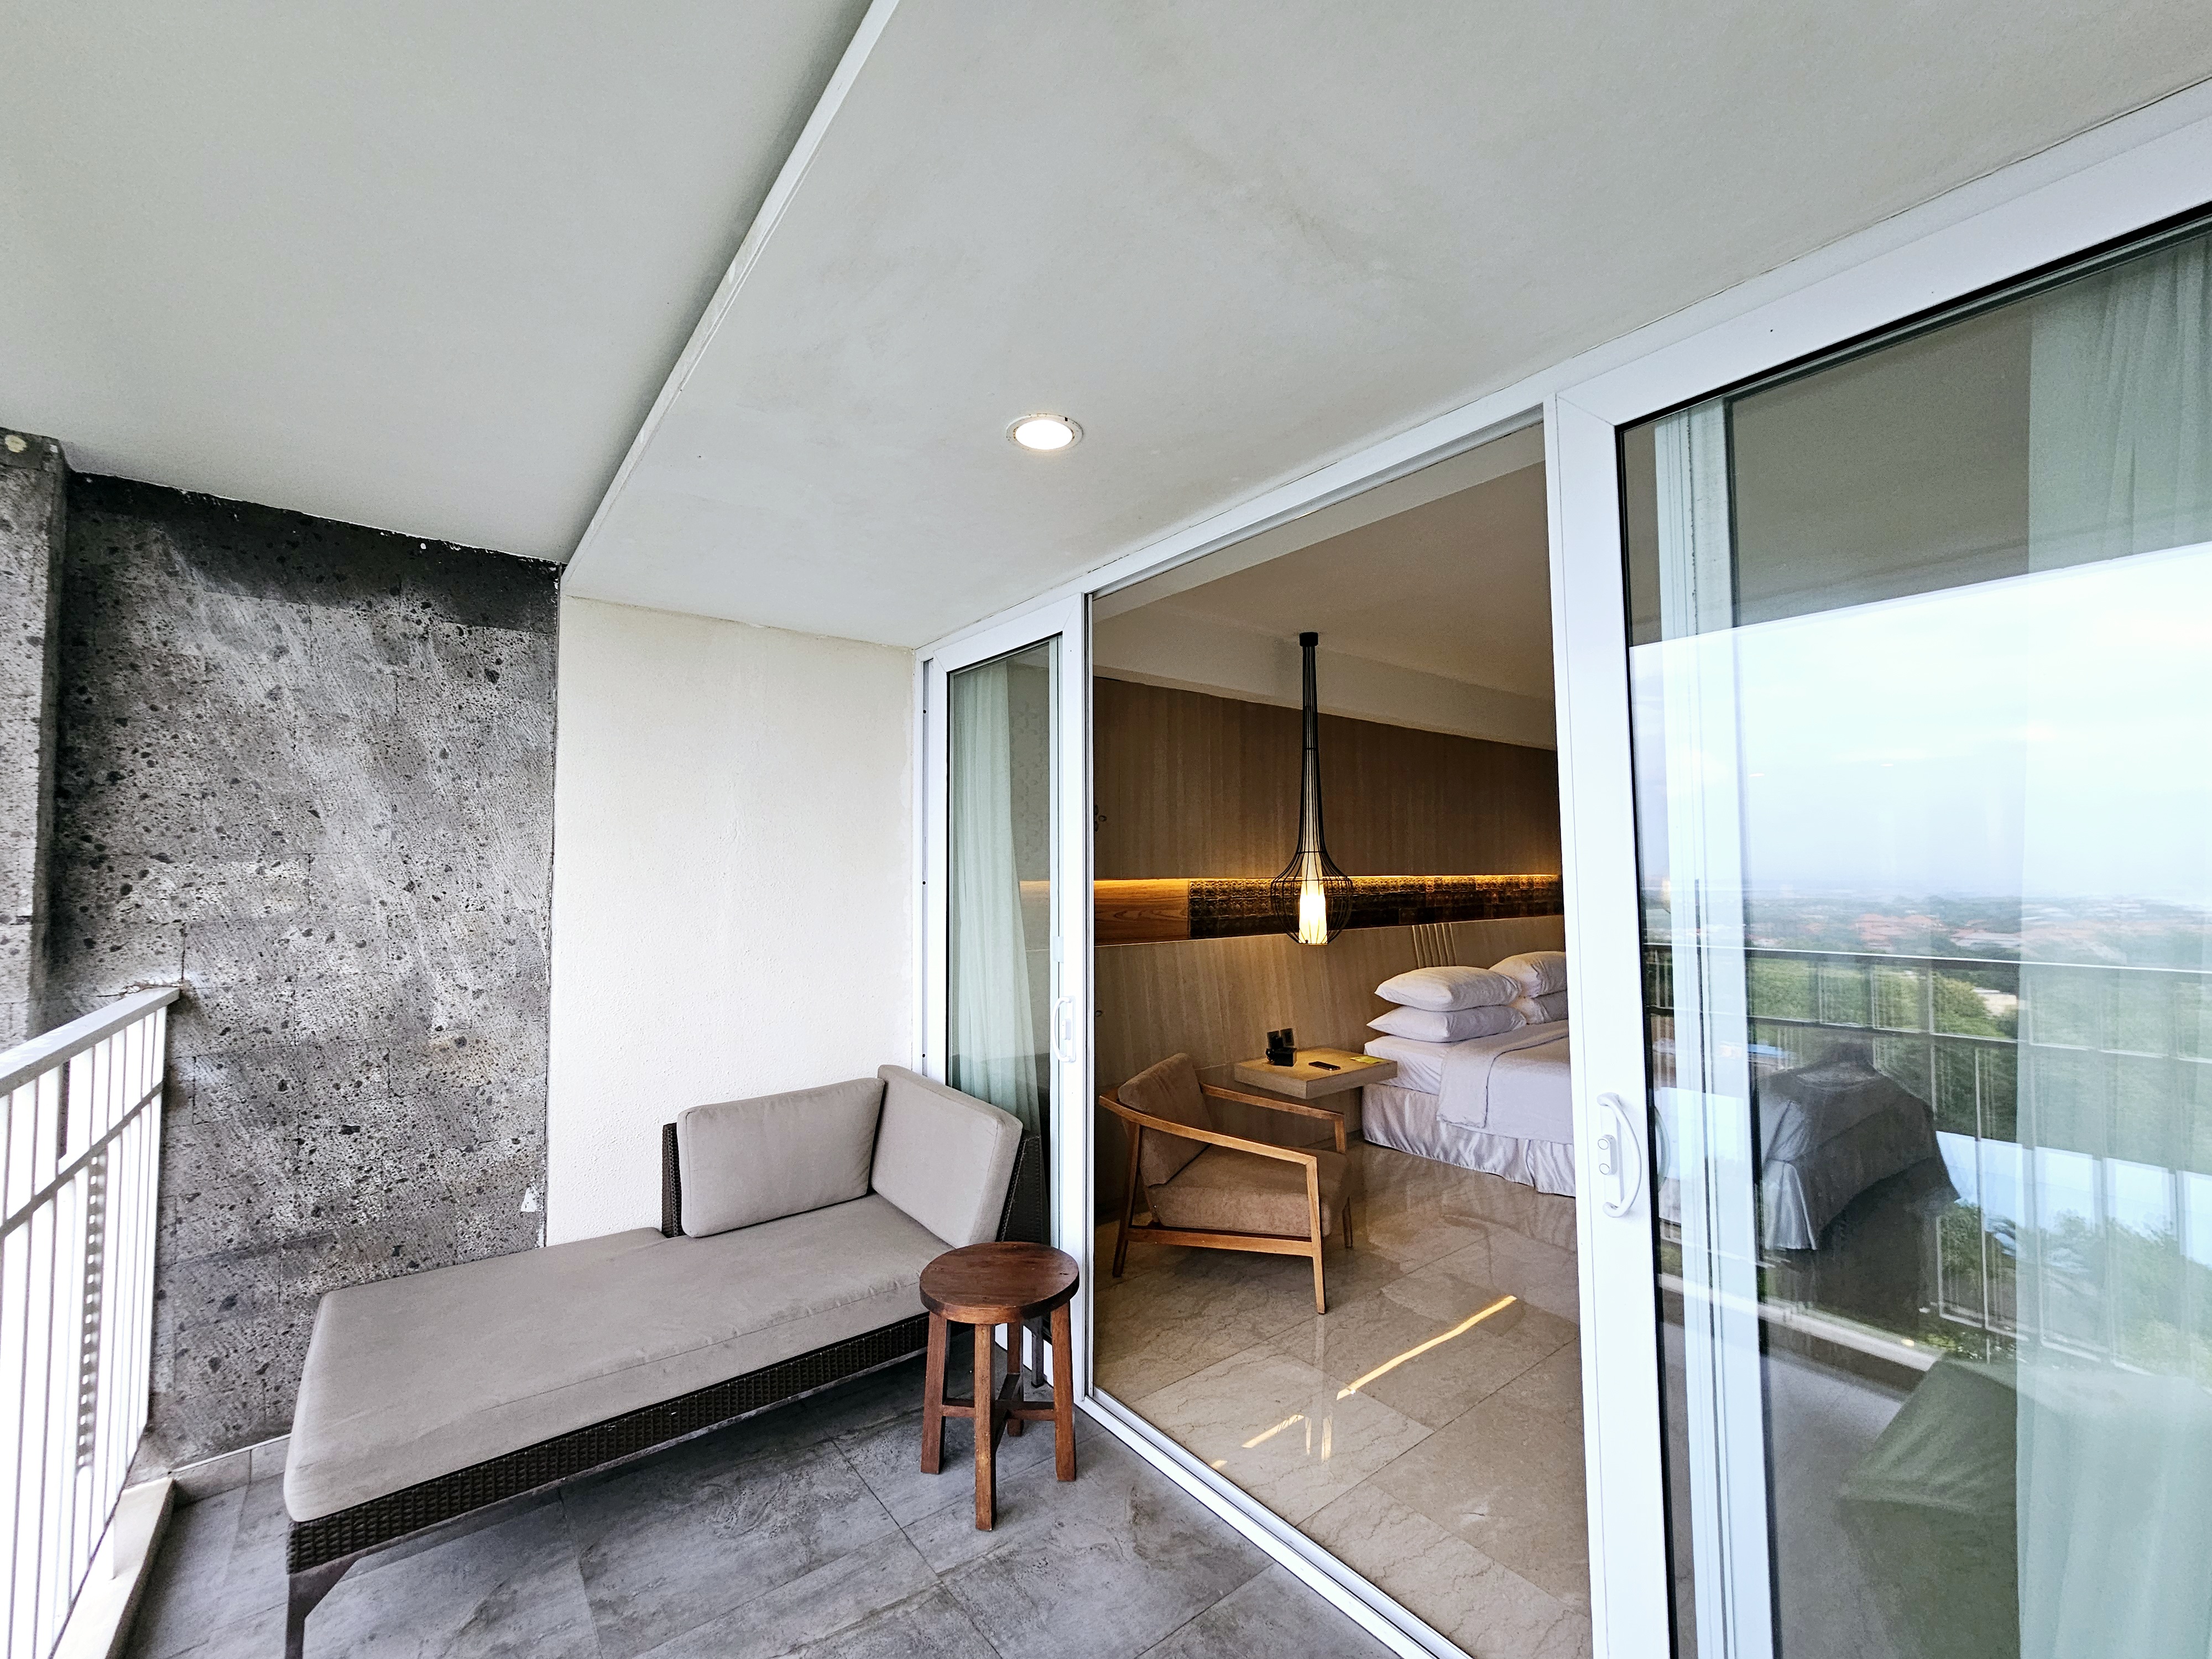 Four Points by Sheraton Ungasan,Bali.
Unexpected stay experience.嵺ƽ